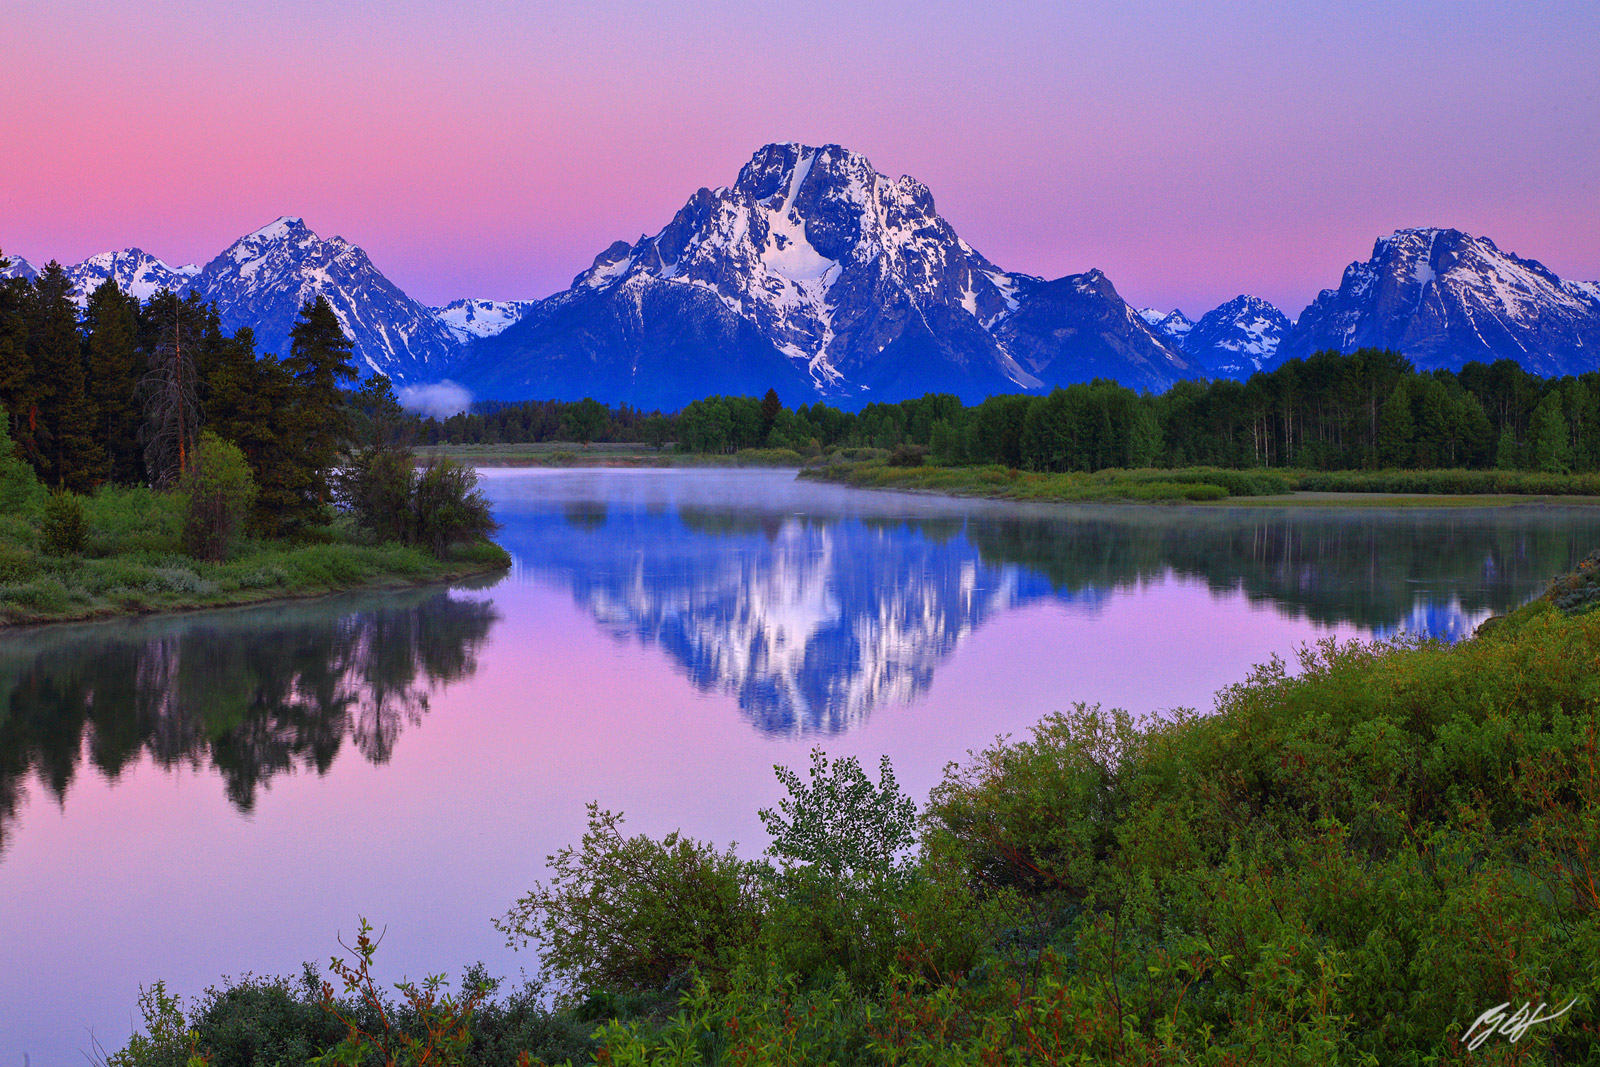 Sunrise Grand Tetons from Oxbow Bend in Grand Teton National Park in Wyoming